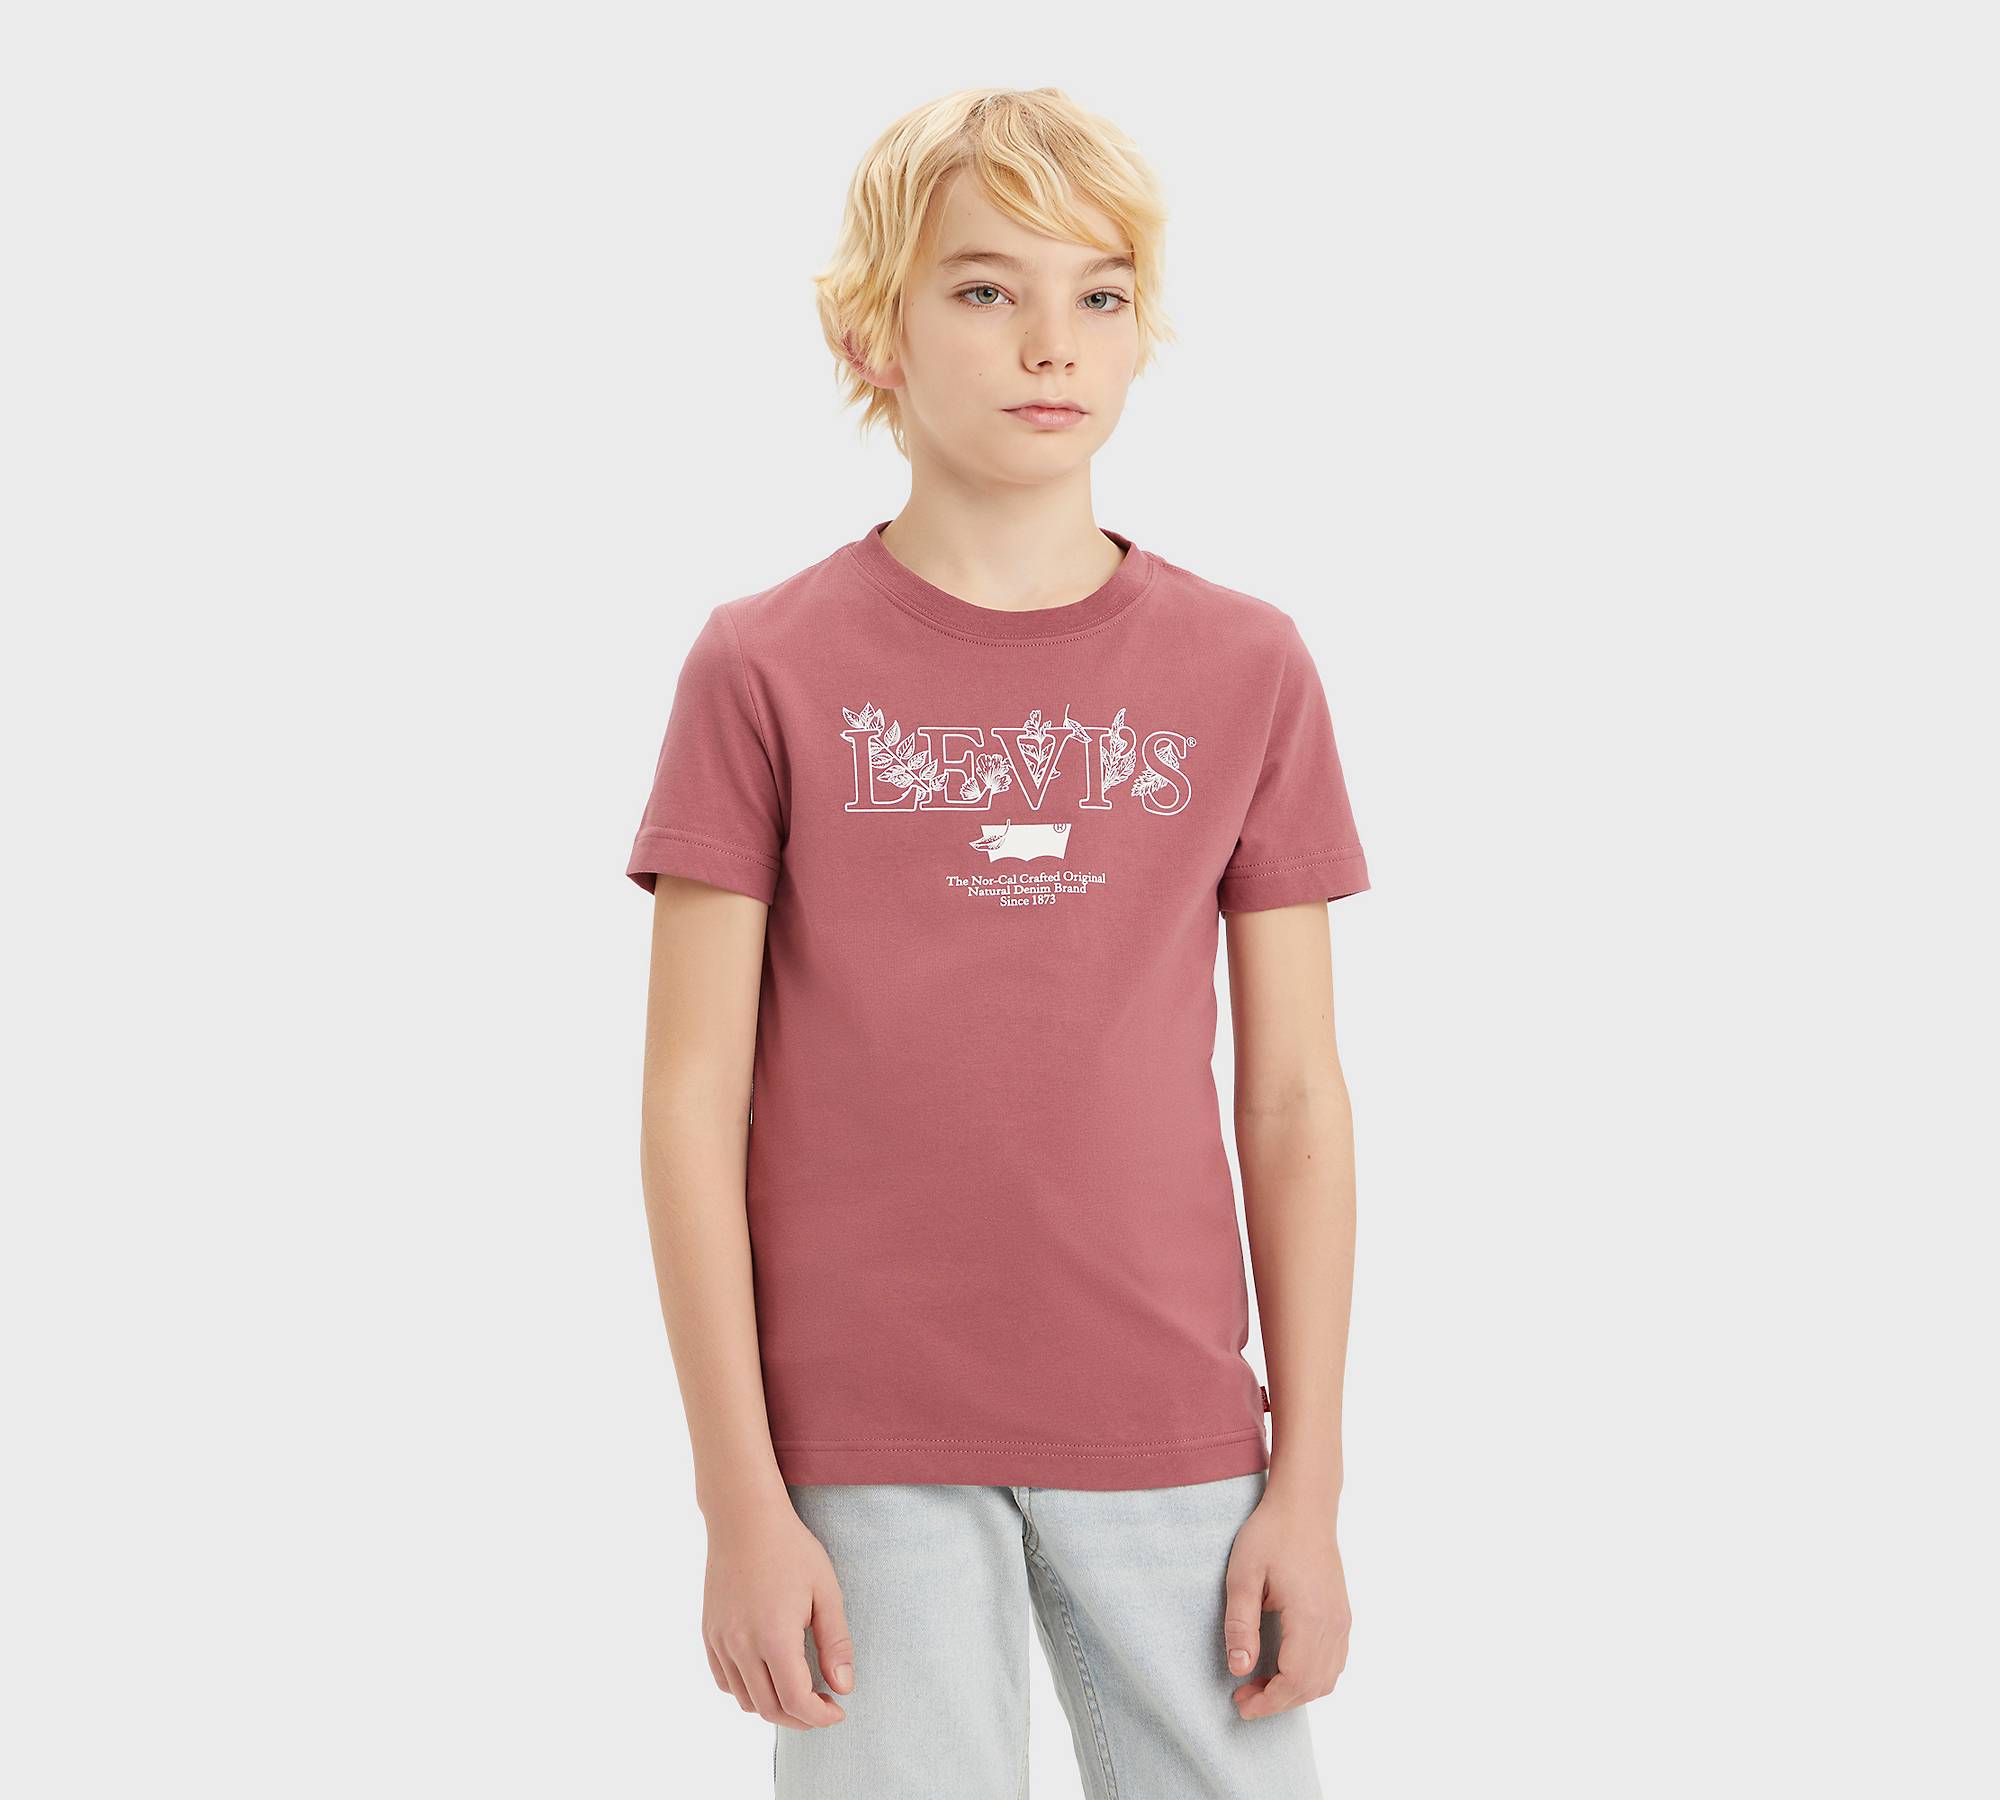 Teenager All Natural Levis Tee 1